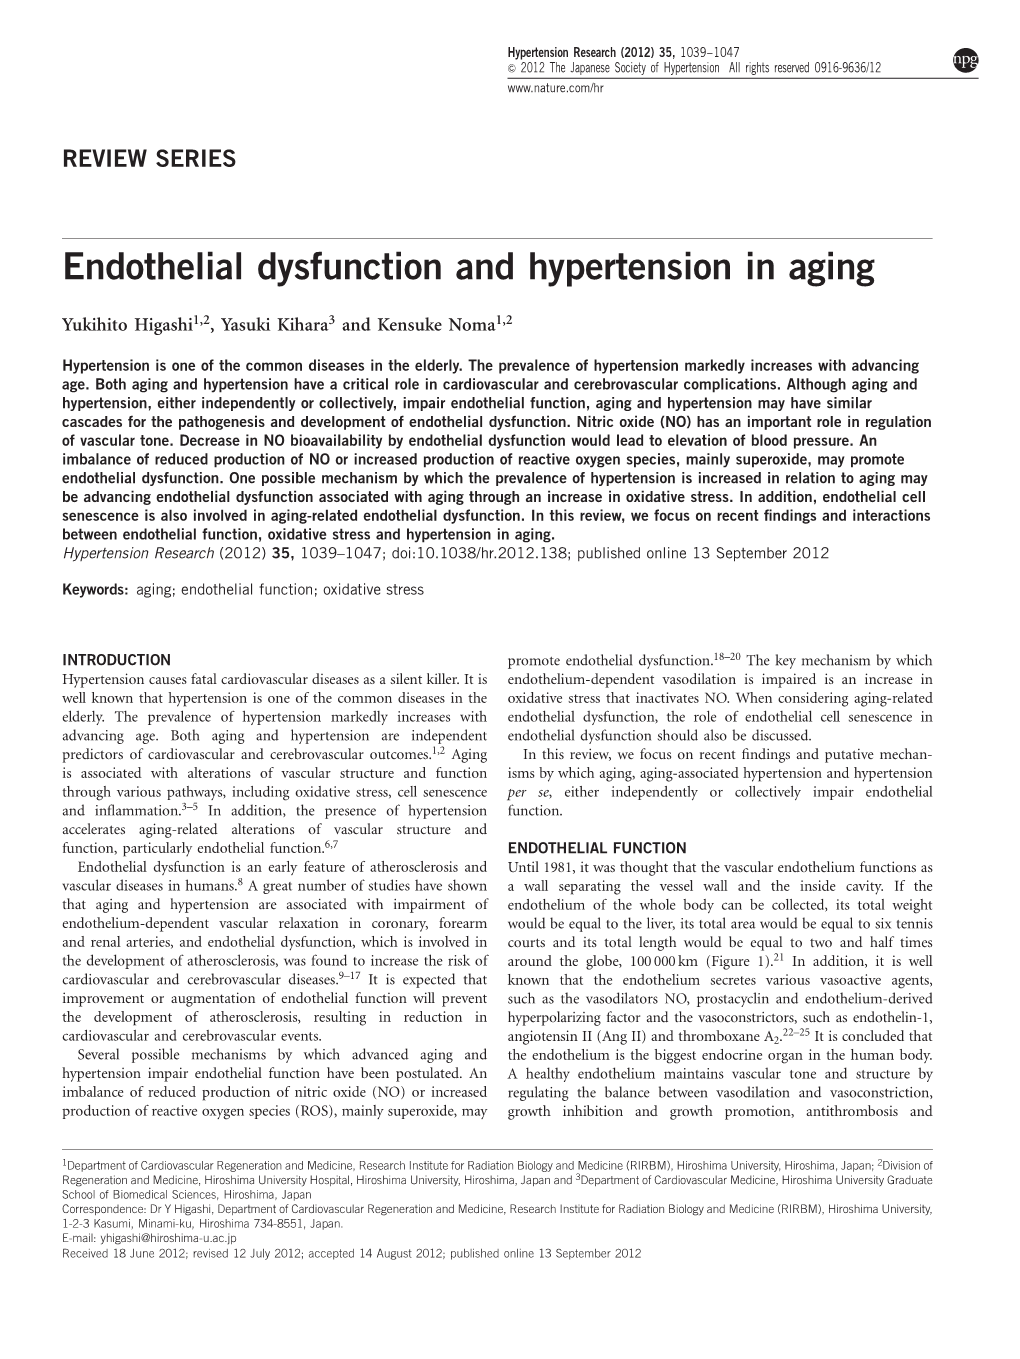 Endothelial Dysfunction and Hypertension in Aging